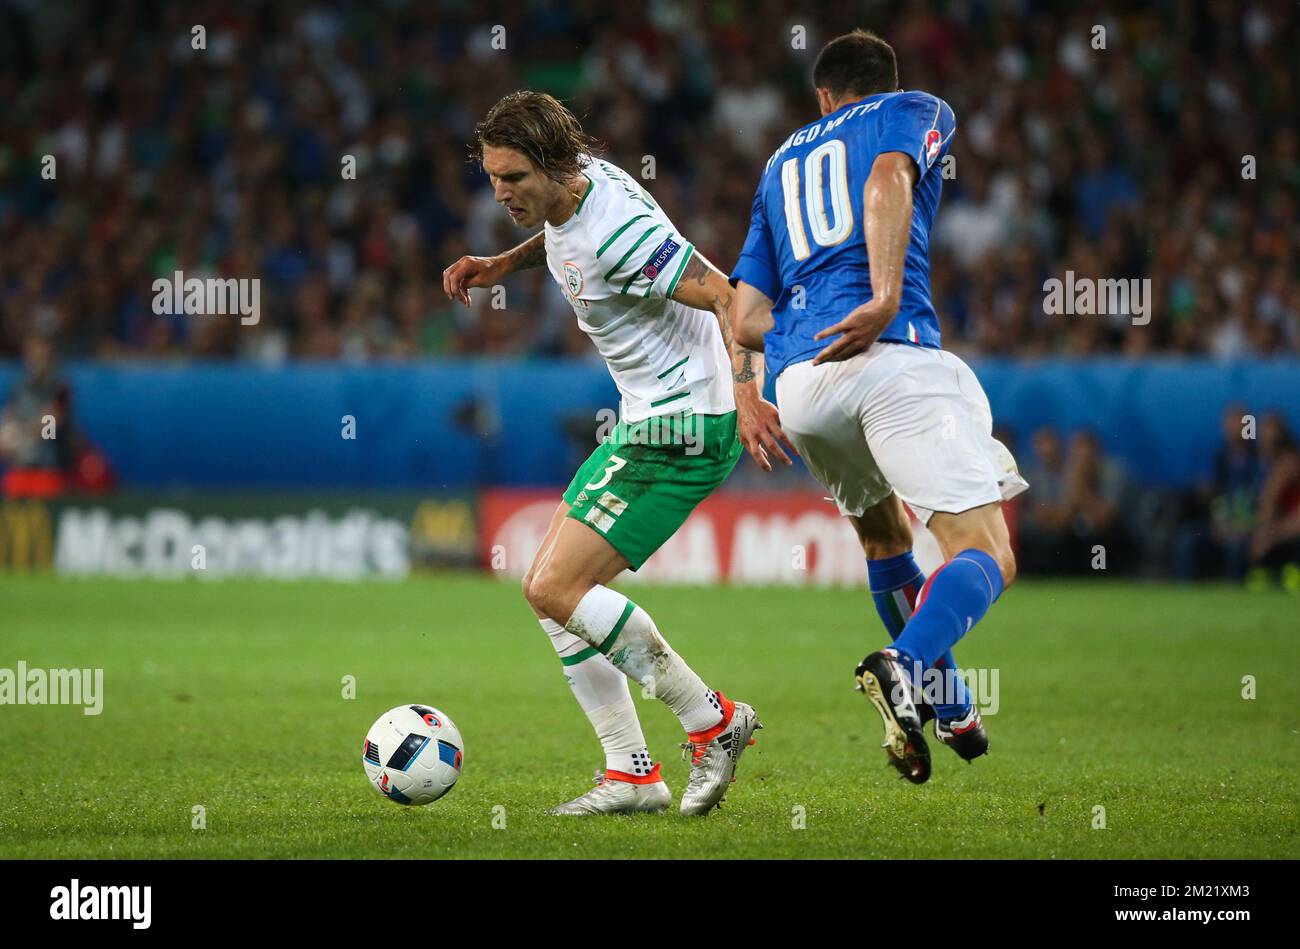 Ireland's Jeff Hendrick and Italy's Thiago Motta fight for the ball during a soccer game between Ireland and Italy, in group E of the group stage of the UEFA Euro 2016 European Championships, Wednesday 22 June 2016 in Villeneuve-d'Ascq, France.  Stock Photo